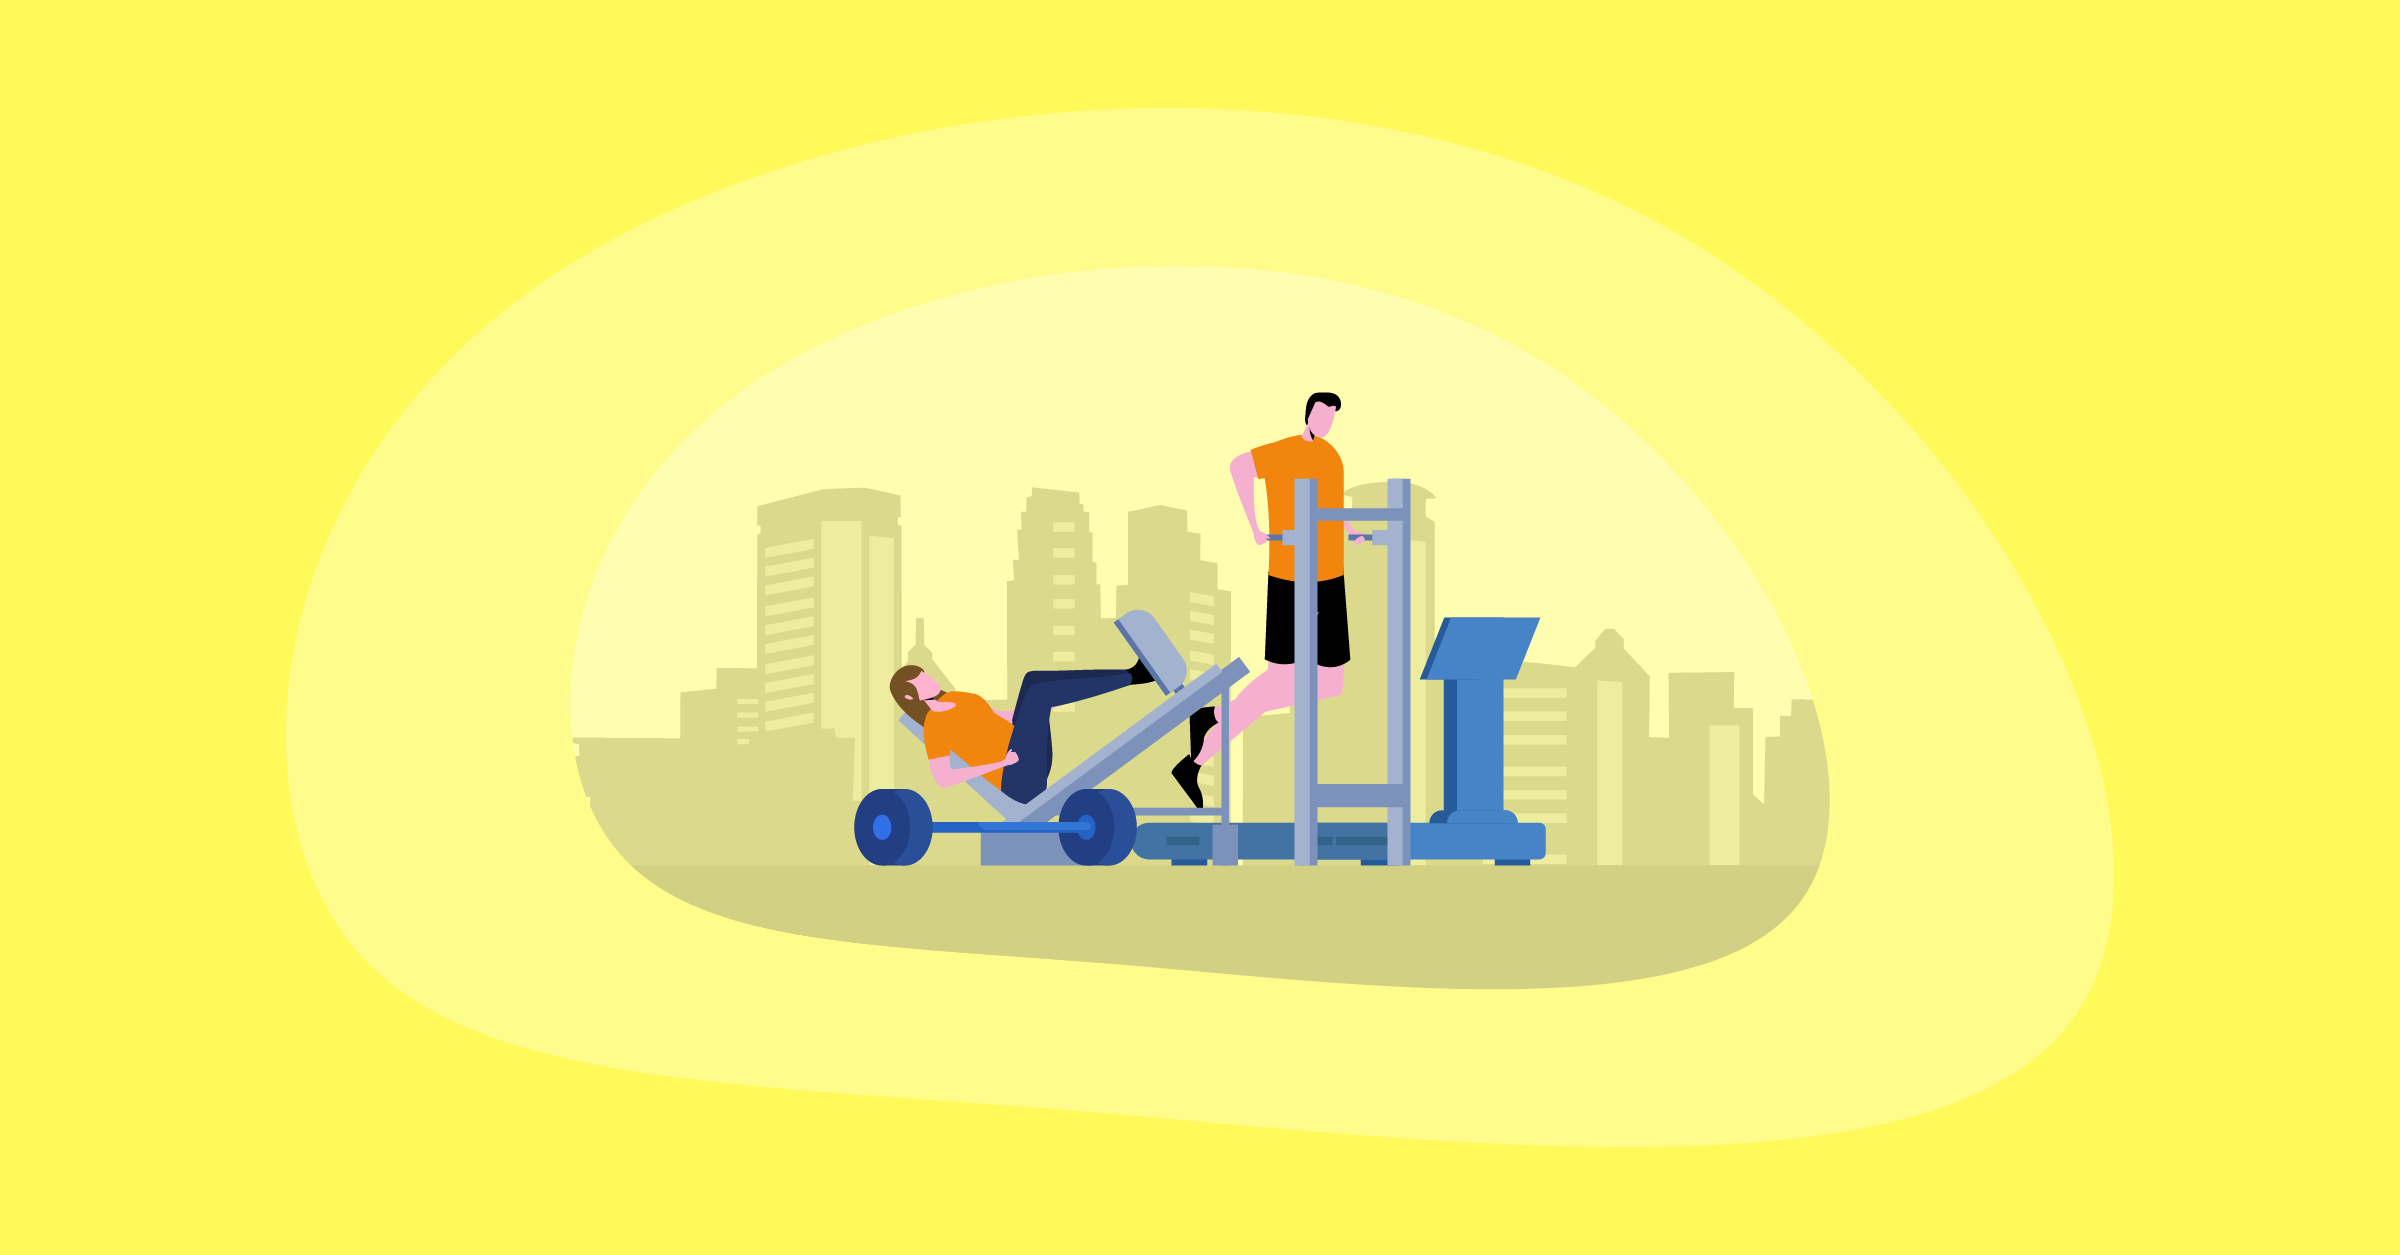 Illustration of two people working out on a gym